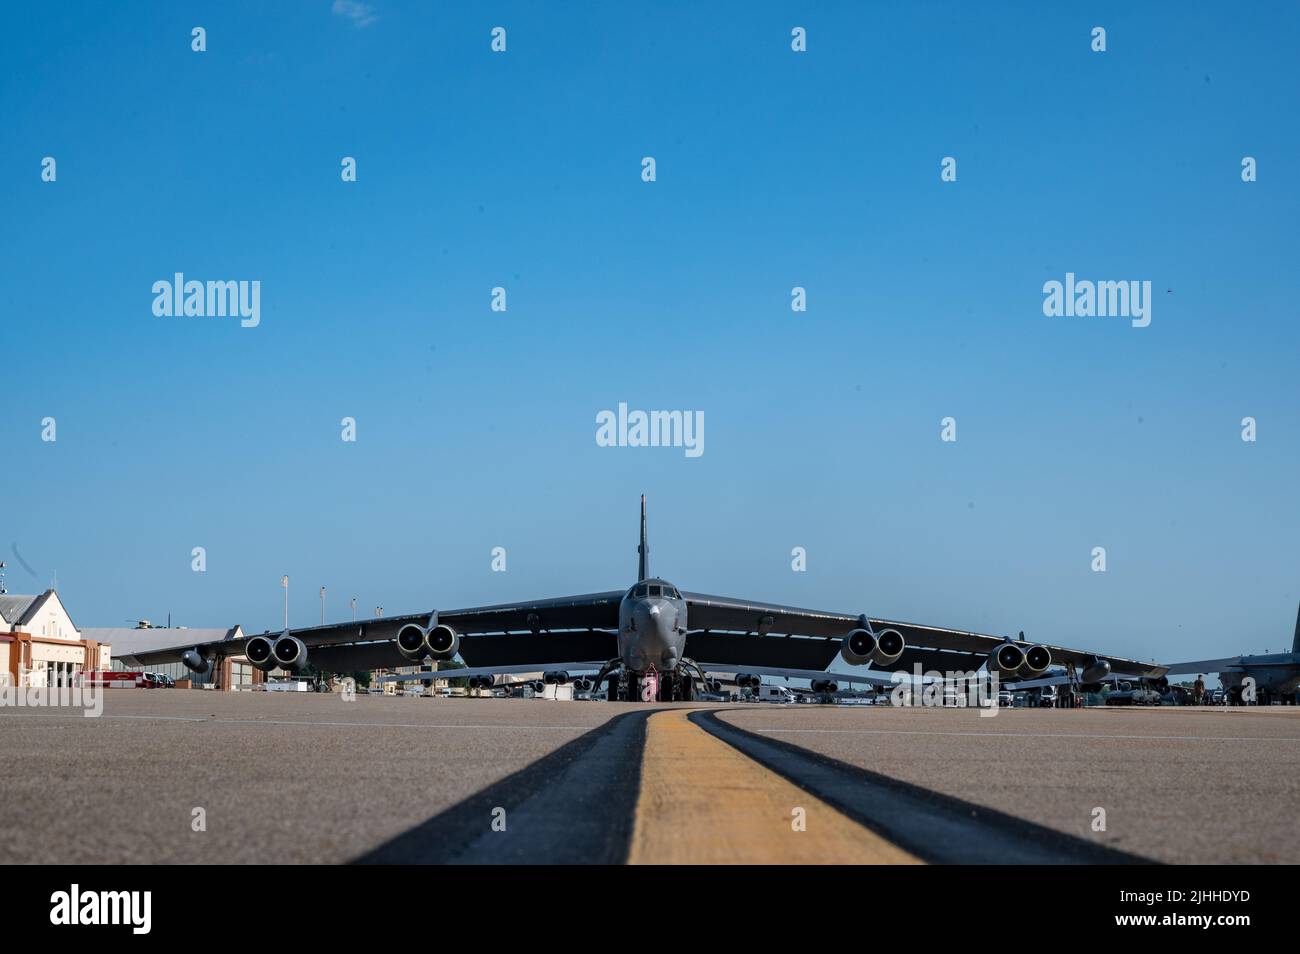 A U.S. Air Force B-52 Stratofortress sits on the flightline July 9, 2022 at Barksdale Air Force Base, Louisiana. The B-52 Stratofortress is a long-range, heavy bomber that can perform a variety of missions. The bomber is capable of flying at high subsonic speeds at altitudes of up to 50,000 feet (15,166.6 meters). (U.S. Air Force photo by Staff Sgt. Tiffany A Emery) Stock Photo